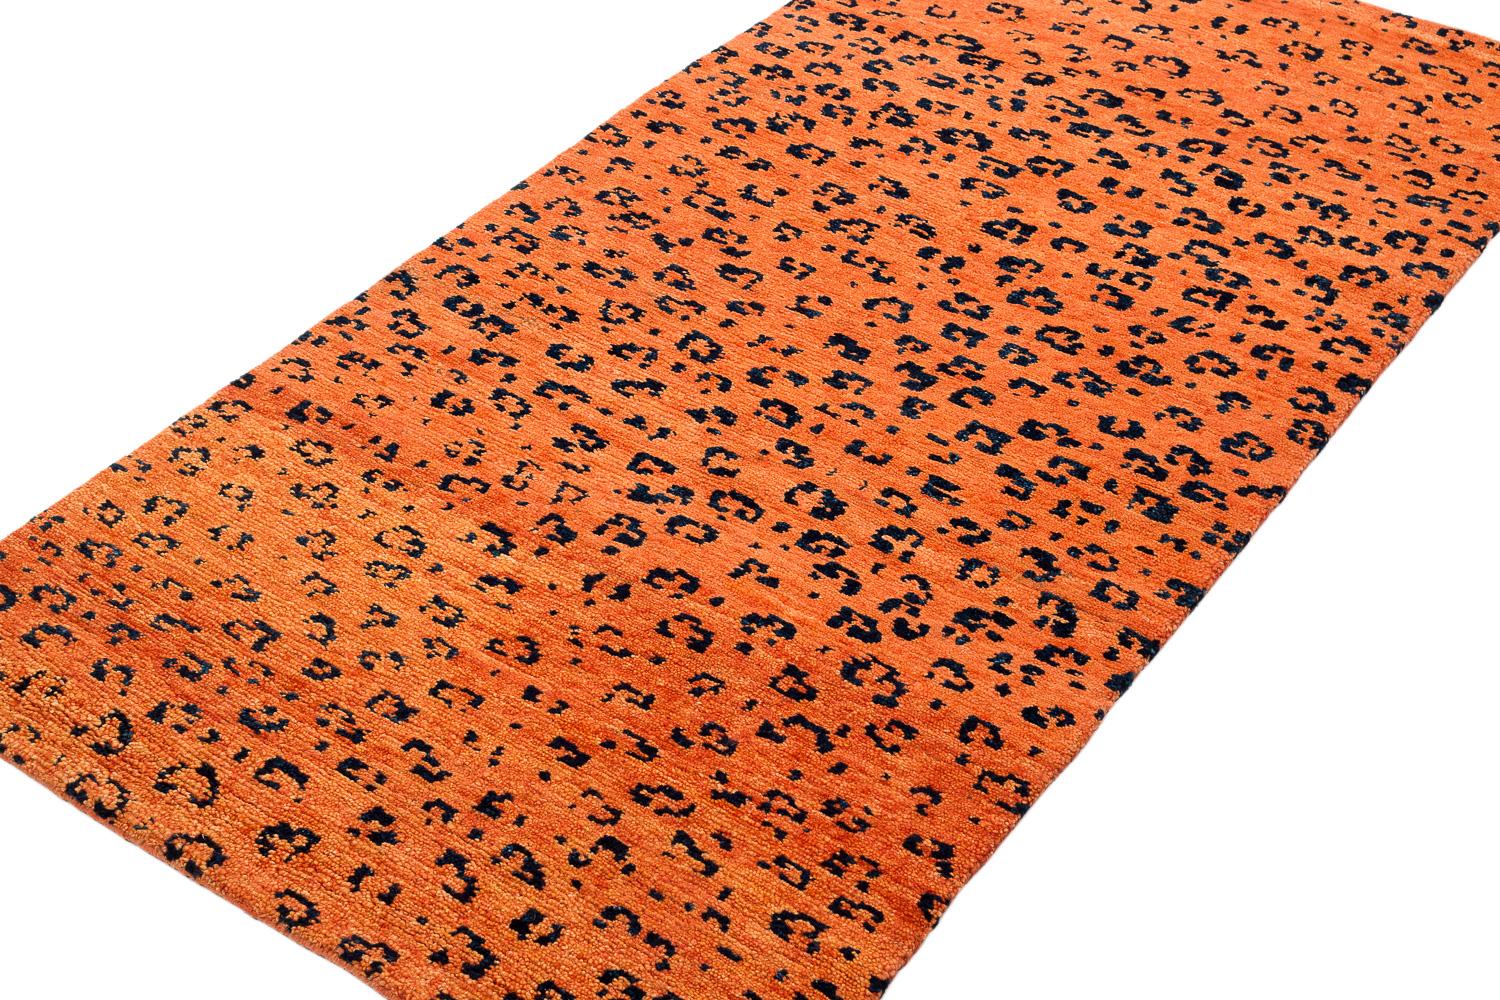 A bright orange contrasts against the strong black leopard dots in this Leopard print design. Handwoven in handspun Himalayan wool, Joseph Carini was inspired by the markings on one of the most majestic and elusive wild creatures, in a versatile 3'